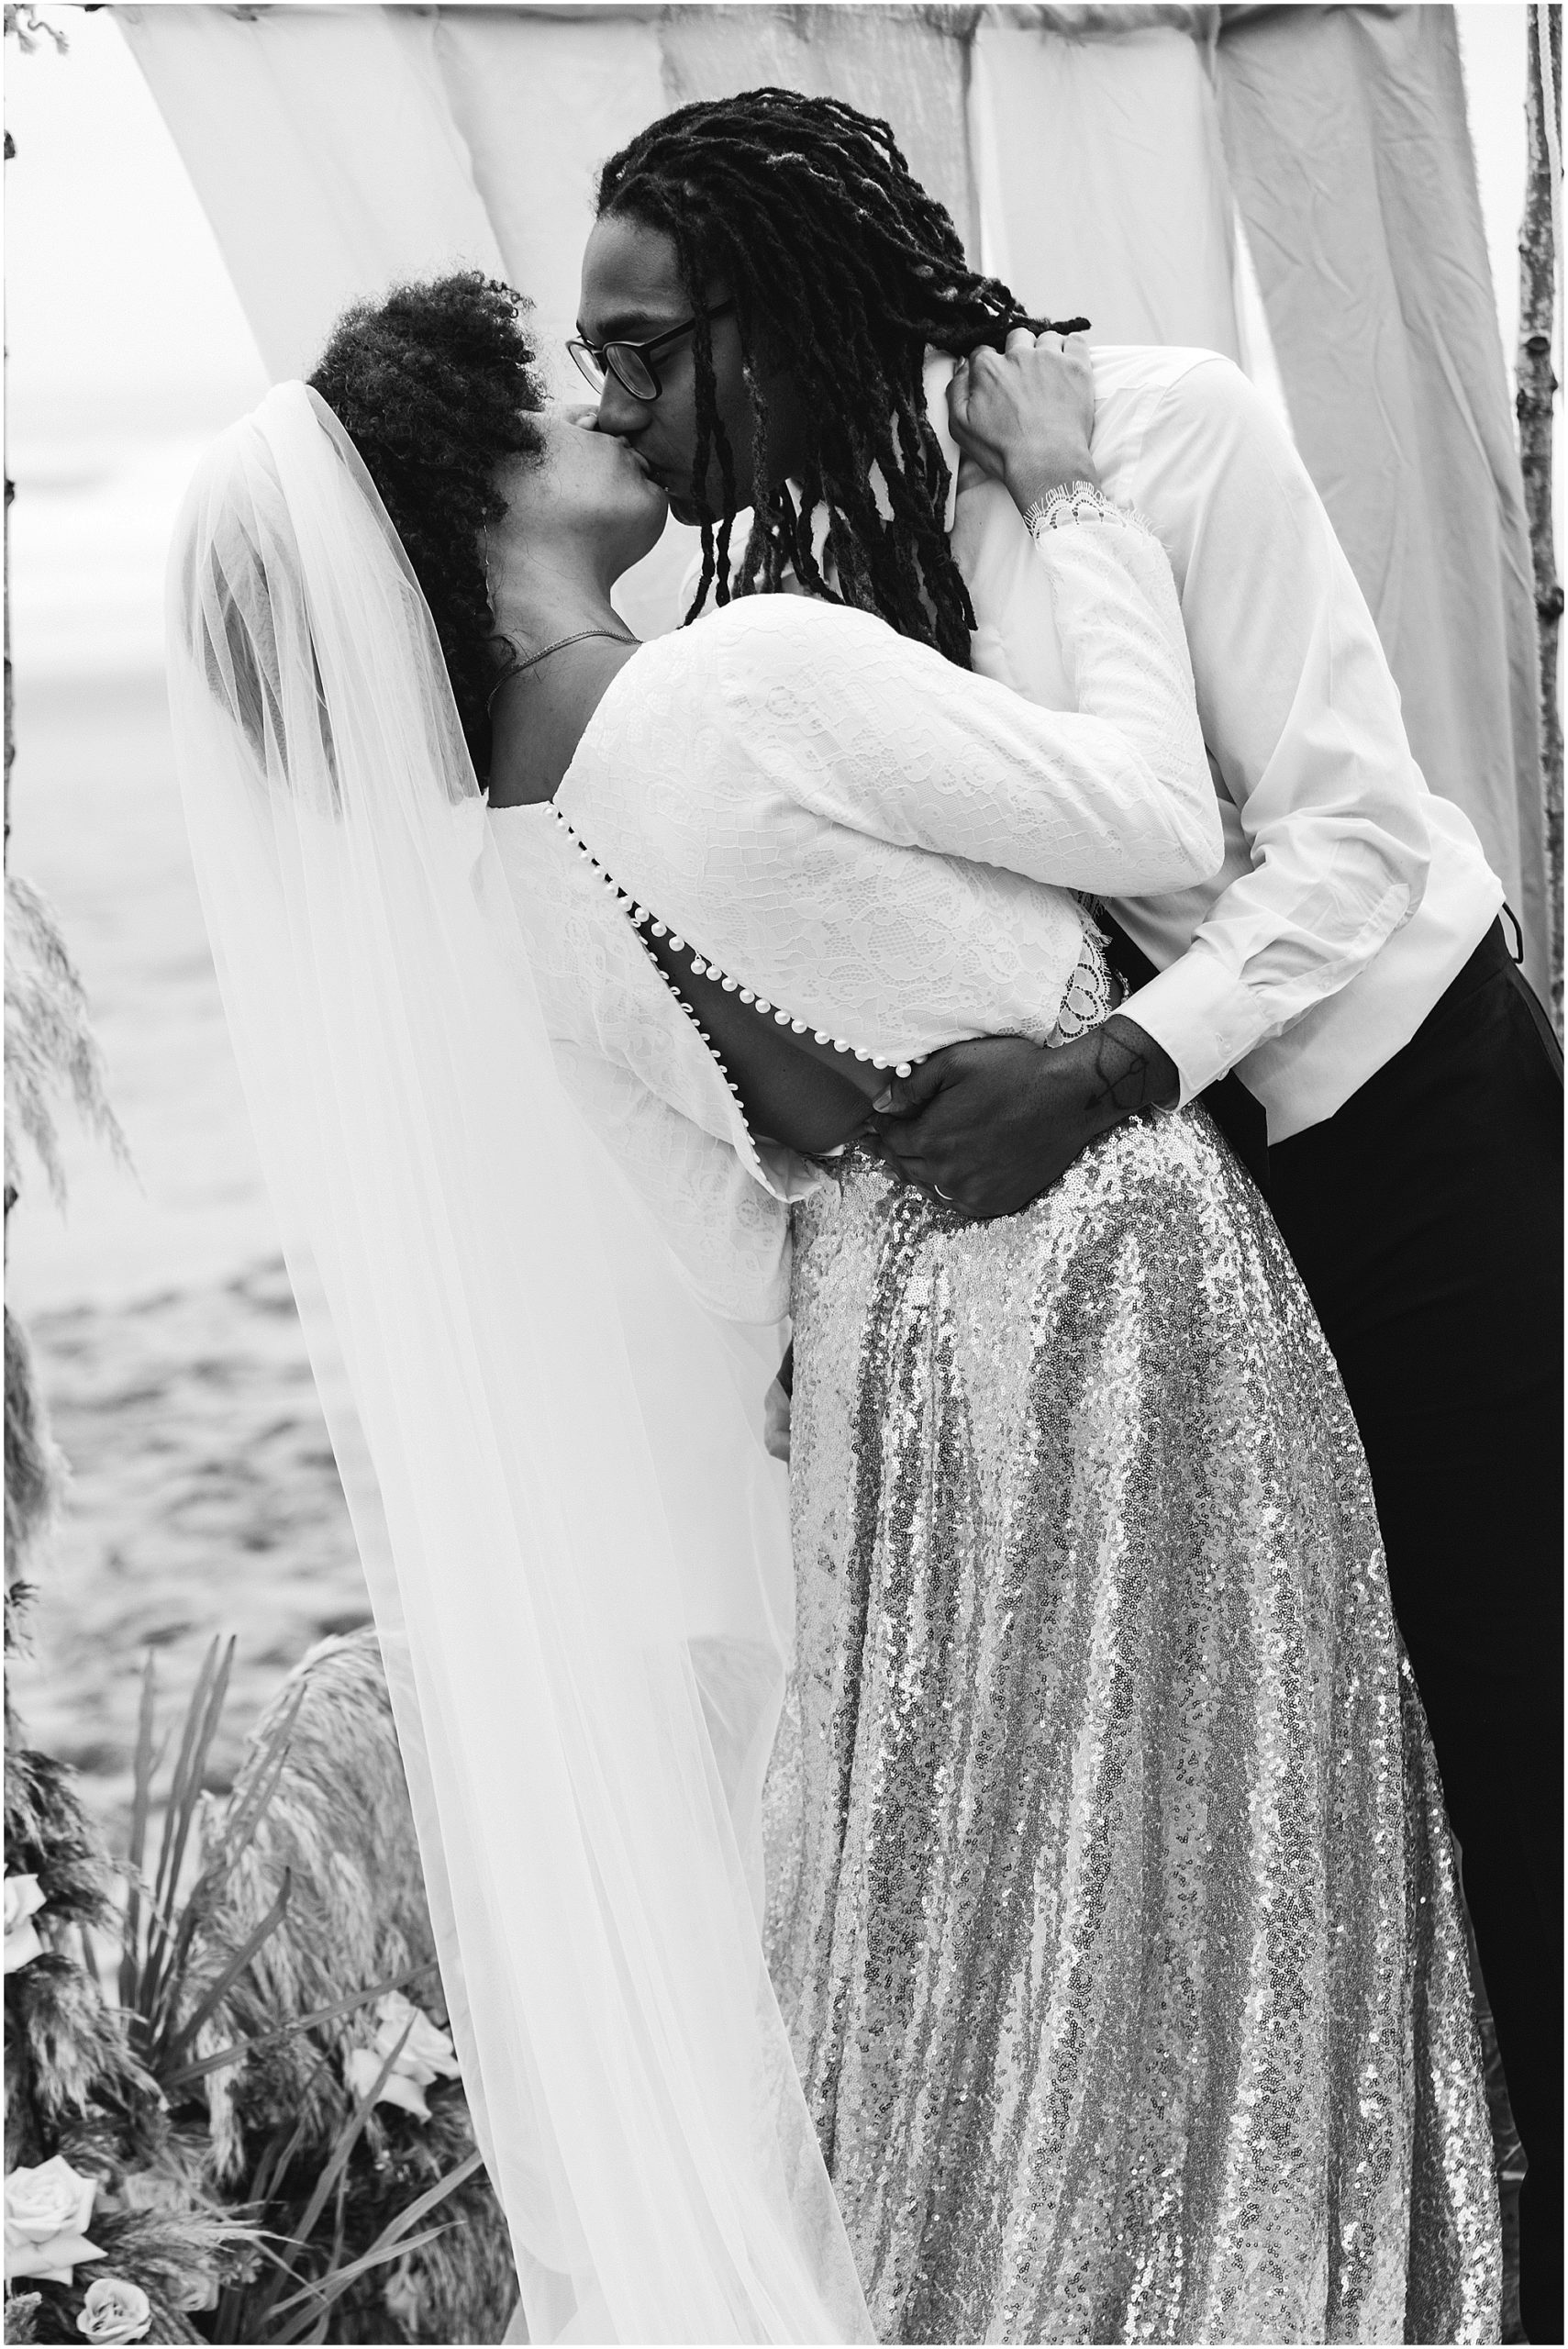 A stunning black and white image of a groom dipping his bride back for their first kiss during their Oregon Coast elopement. | Erica Swantek Photography